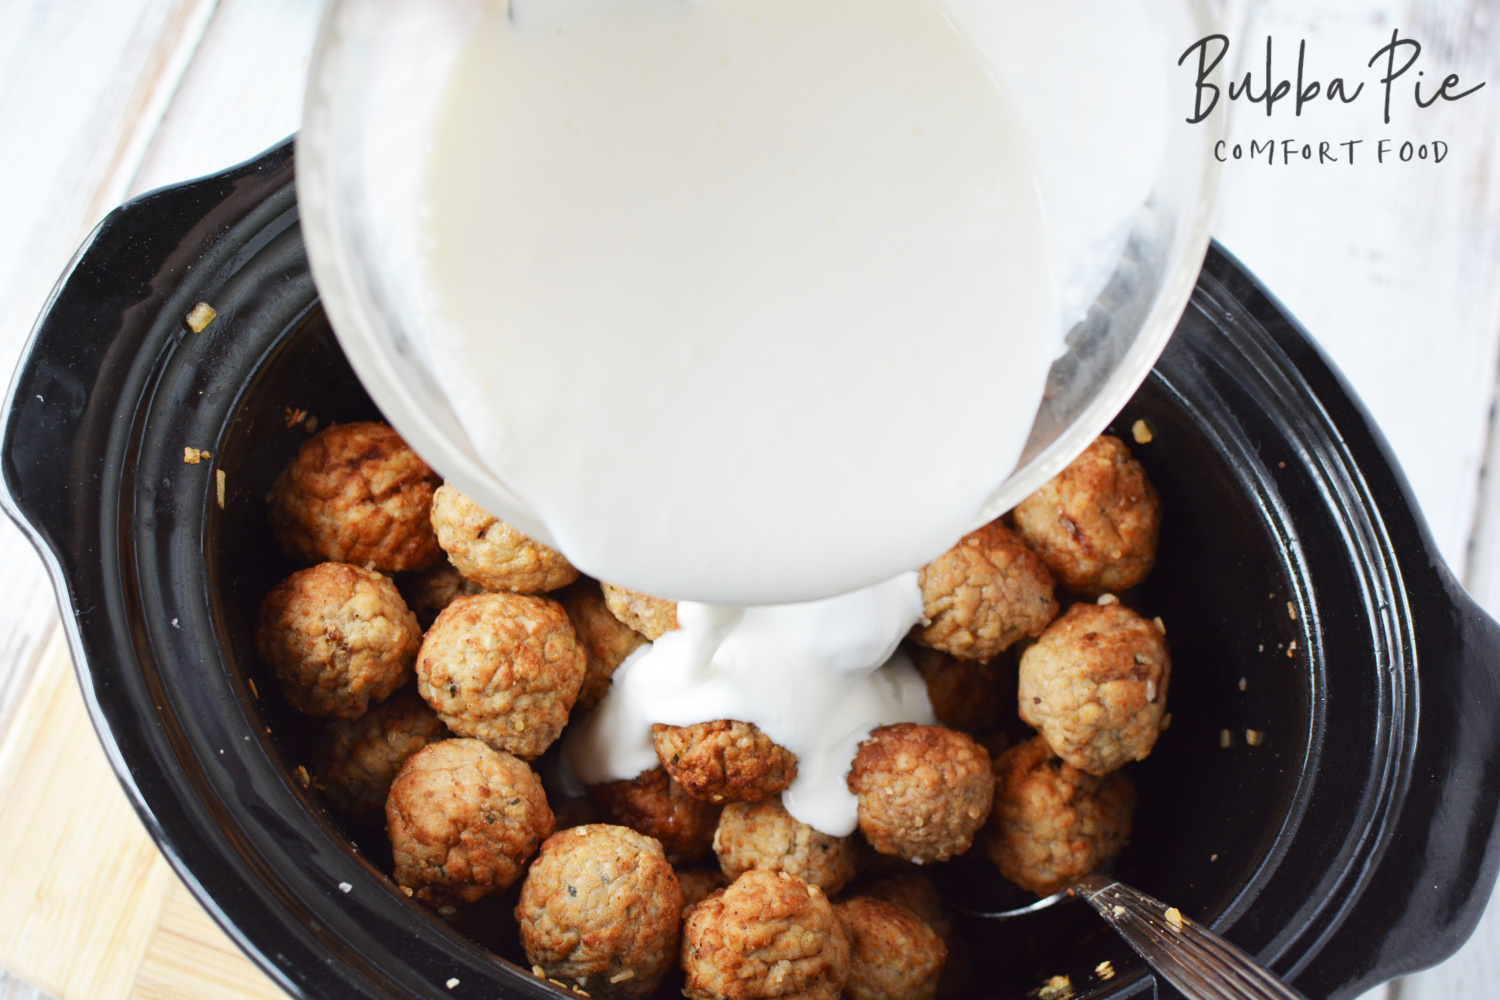 Crock Pot Swedish Meatballs recipe adds the creamy sauce at the end